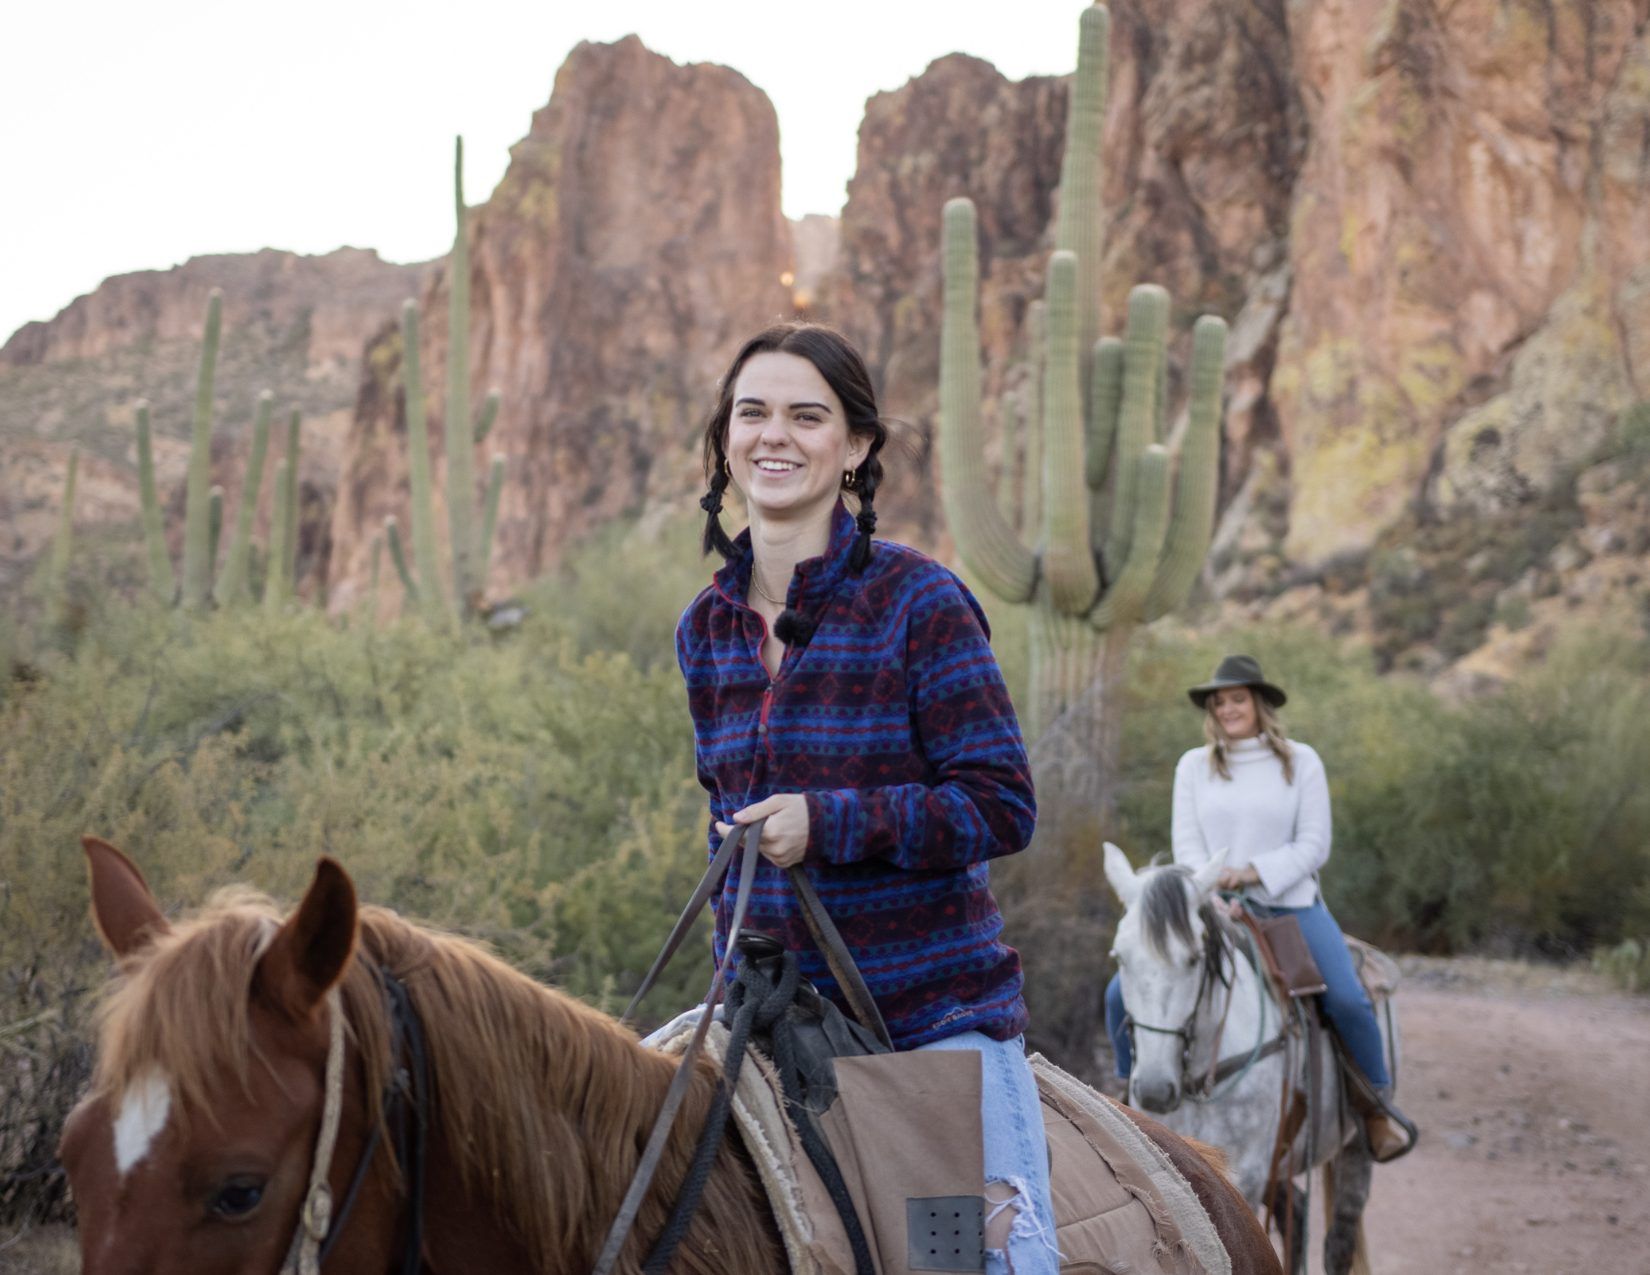 girl on a brown horse with another woman on a white horse in the background at Saguaro Lake Ranch Stables